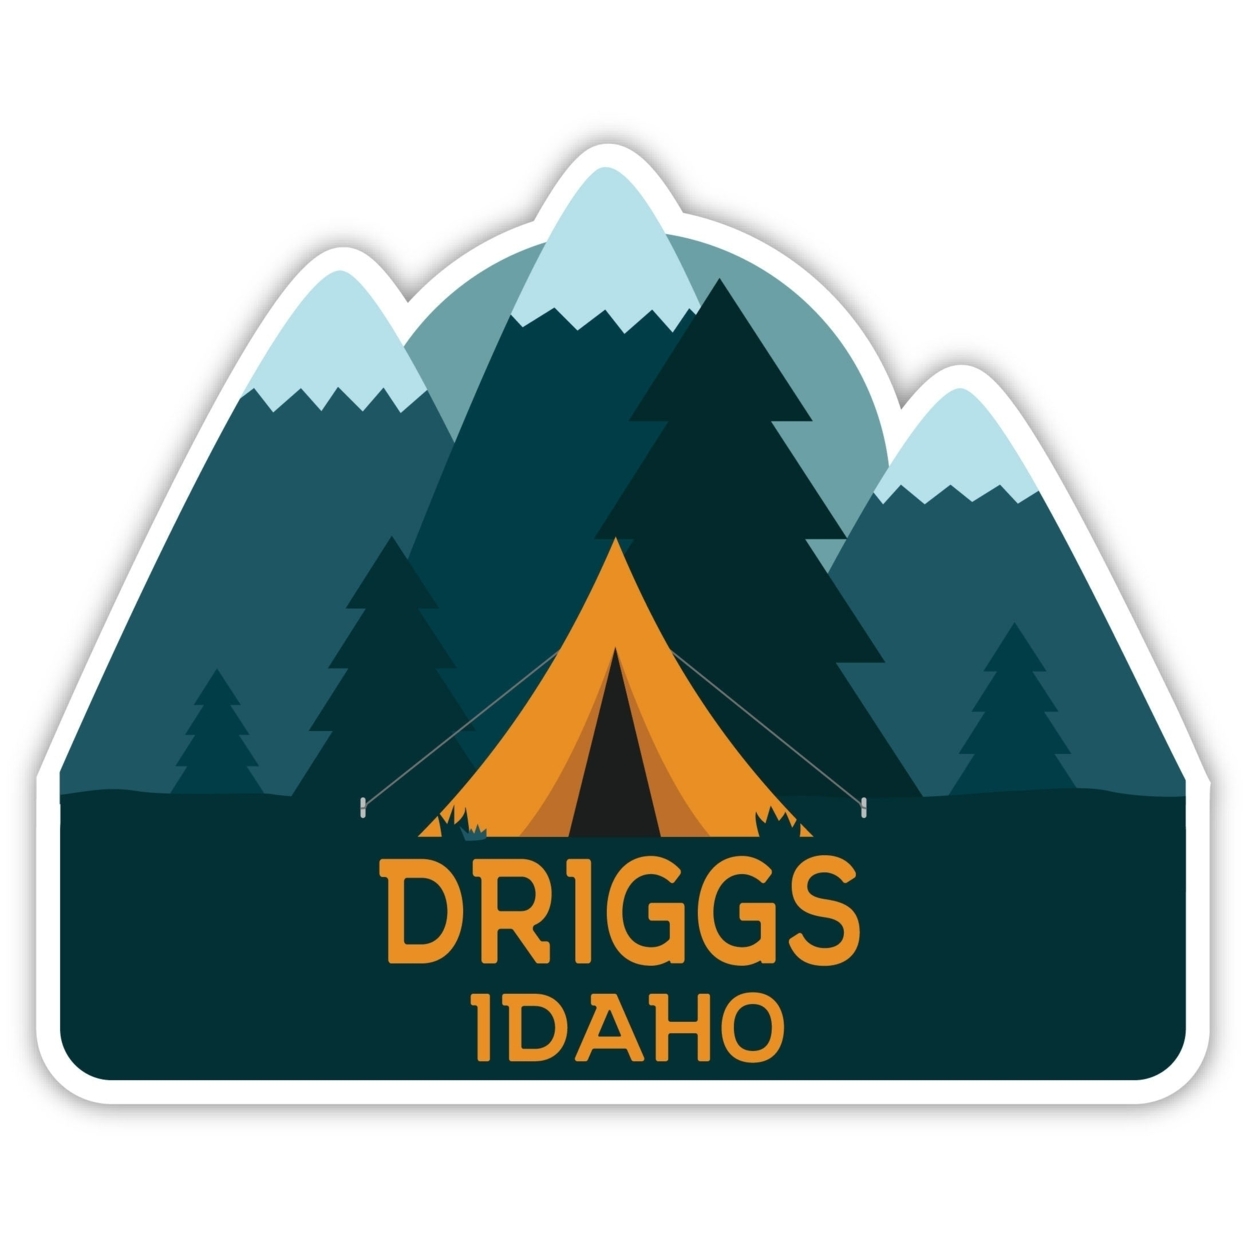 Driggs Idaho Souvenir Decorative Stickers (Choose Theme And Size) - Single Unit, 4-Inch, Great Outdoors